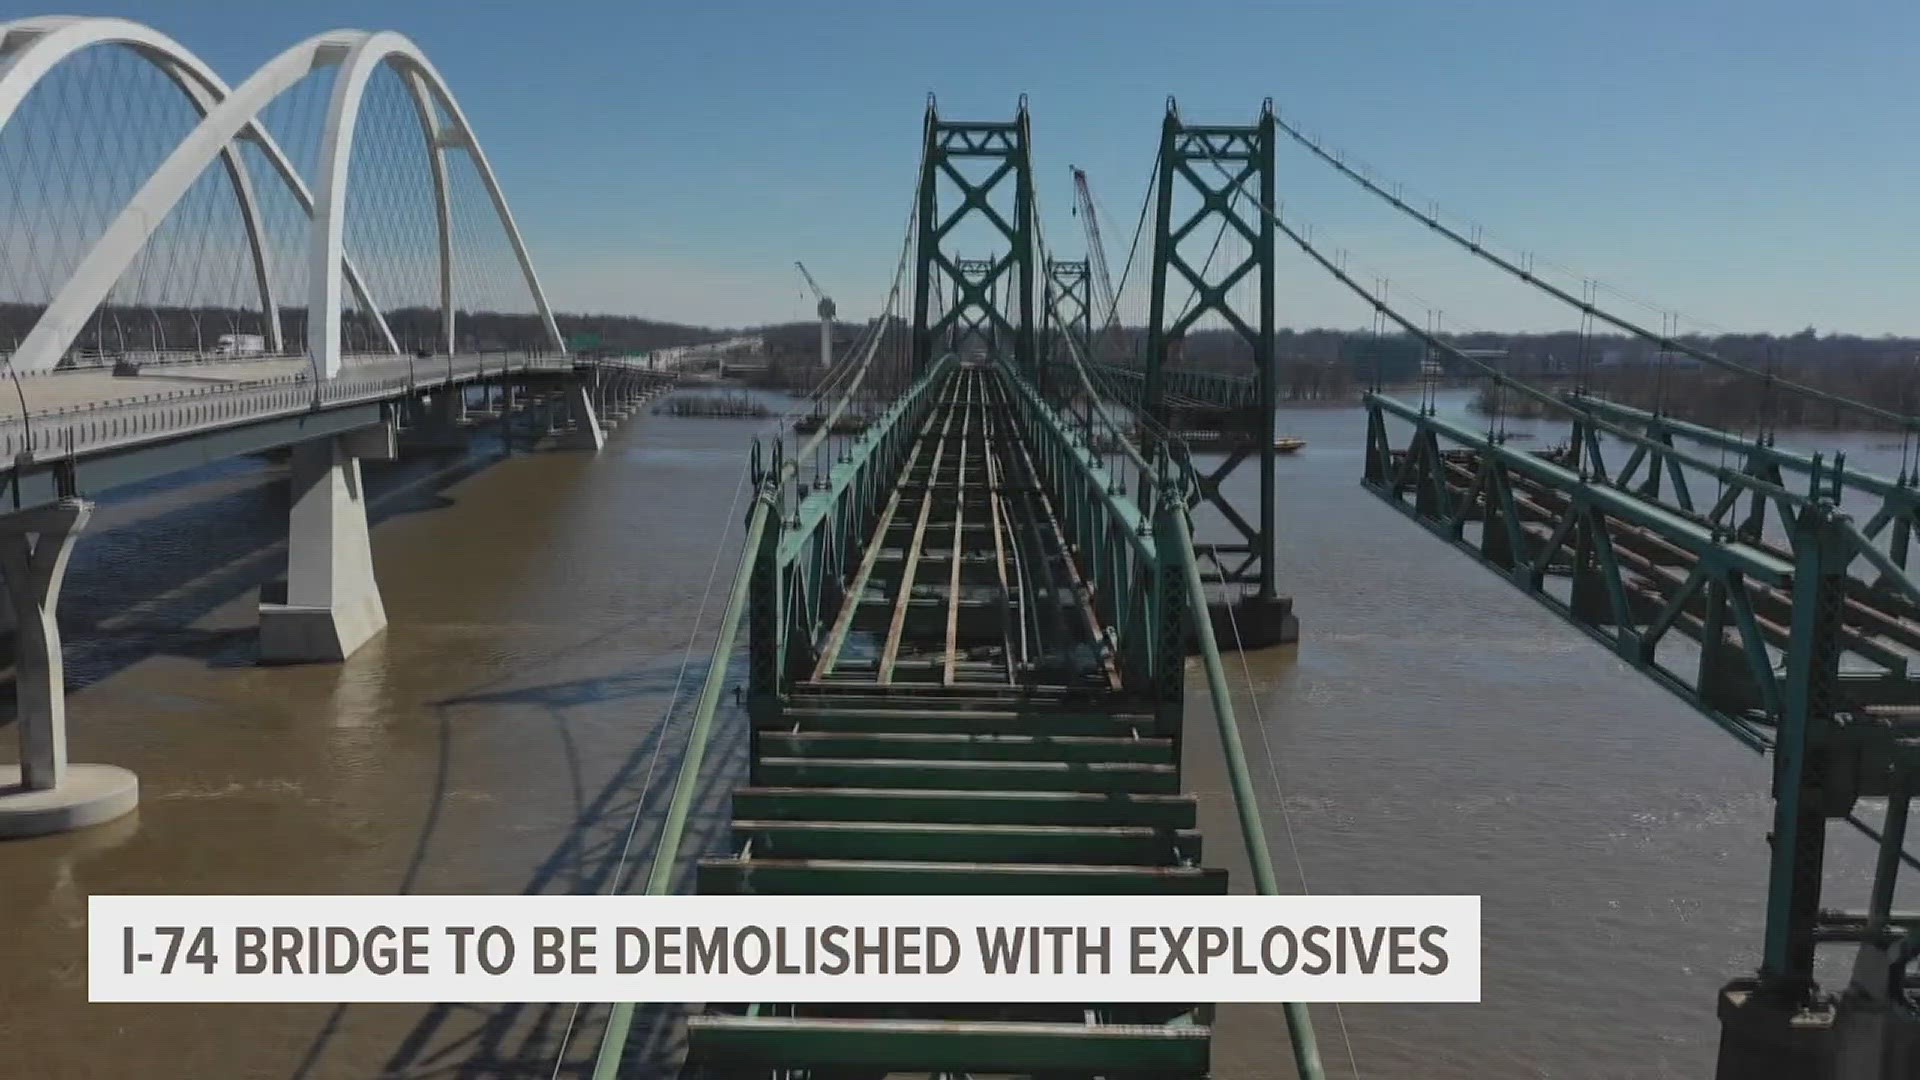 Helm Group, the demolition contractor, will use controlled explosives to remove the suspension cables and towers on the eastbound bridge.